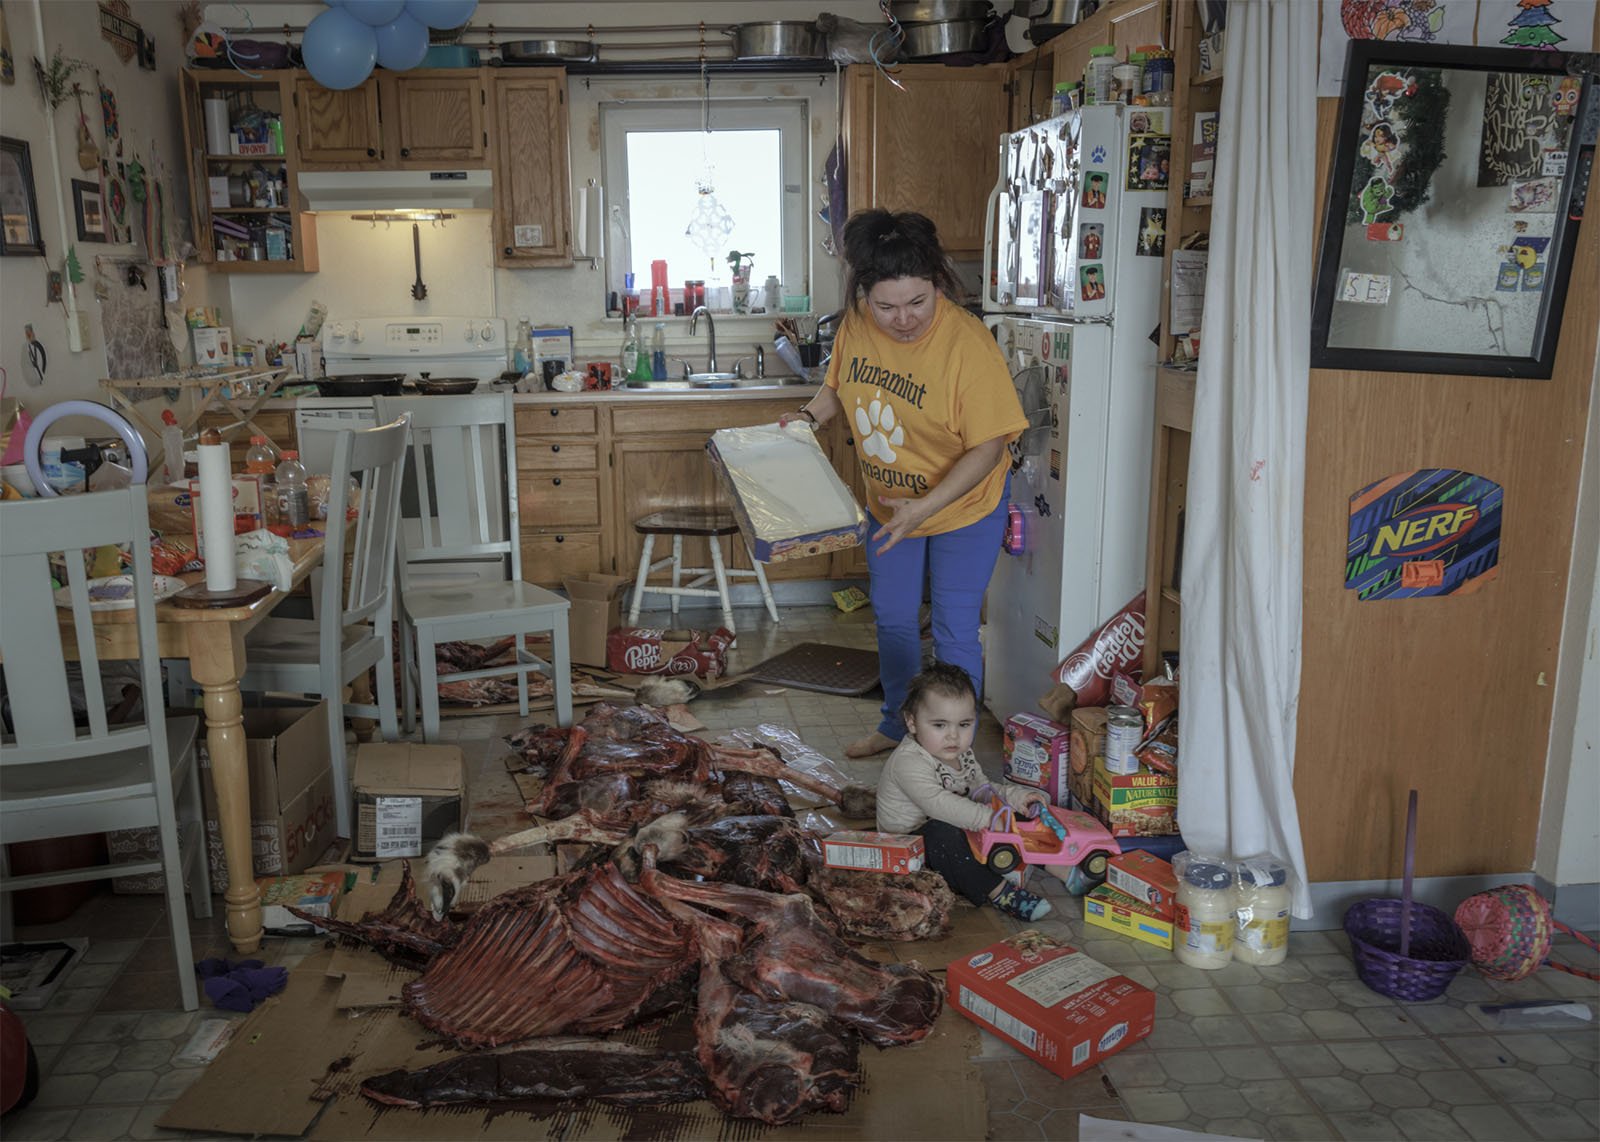 A woman and a toddler in a cluttered kitchen, where the woman is reading a recipe and the child is sitting among scattered groceries and a large pile of raw meat on cardboard.